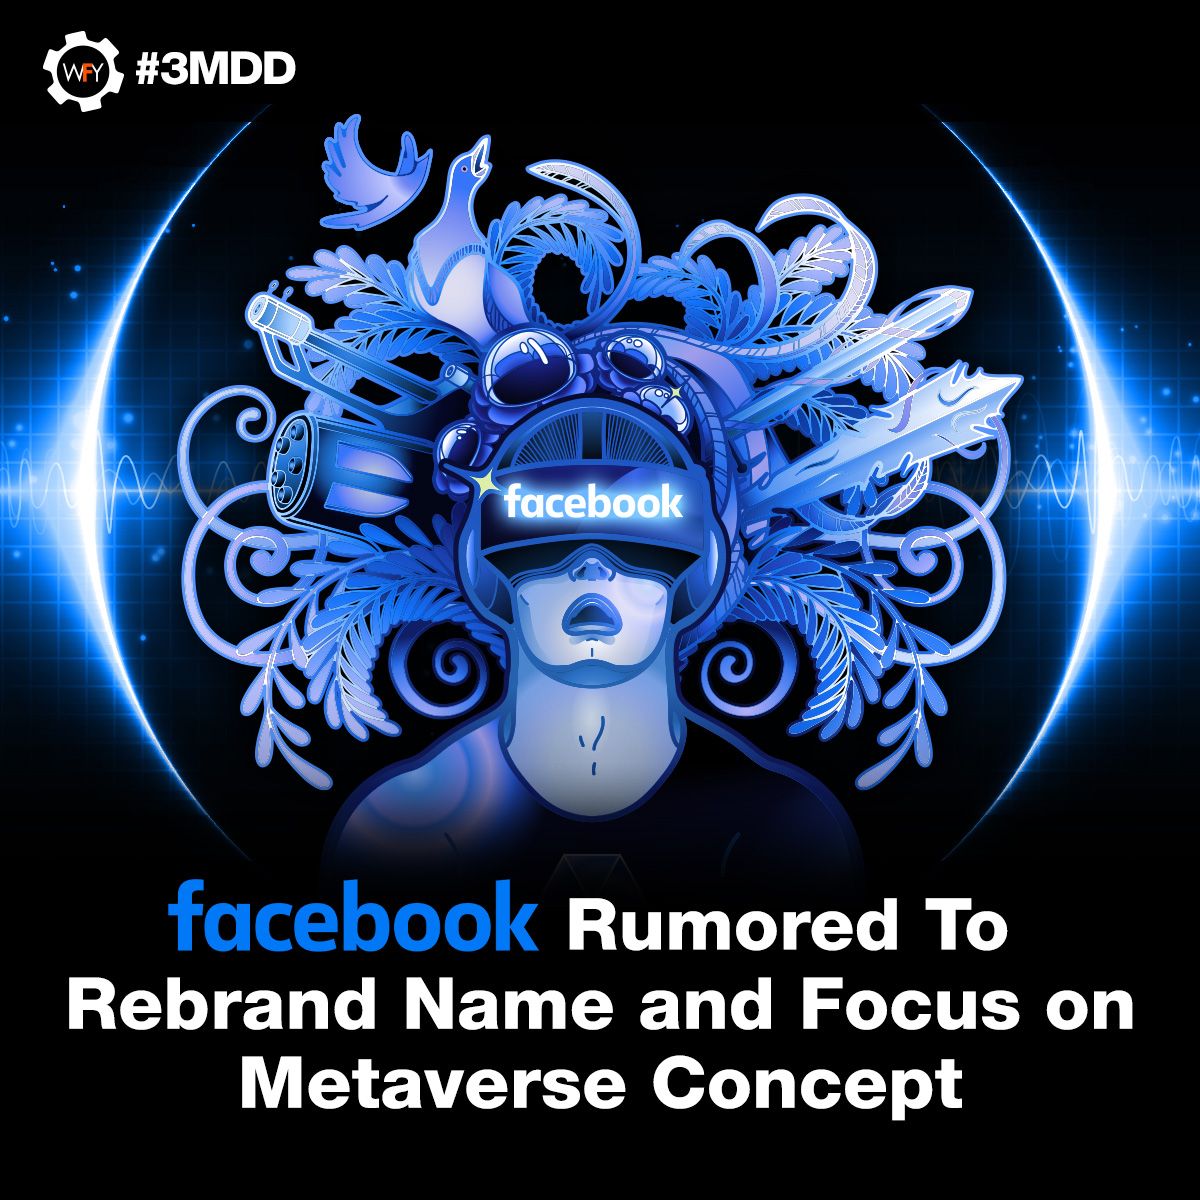 Facebook Rumored to Rebrand Name and focus on Metaverse Concept